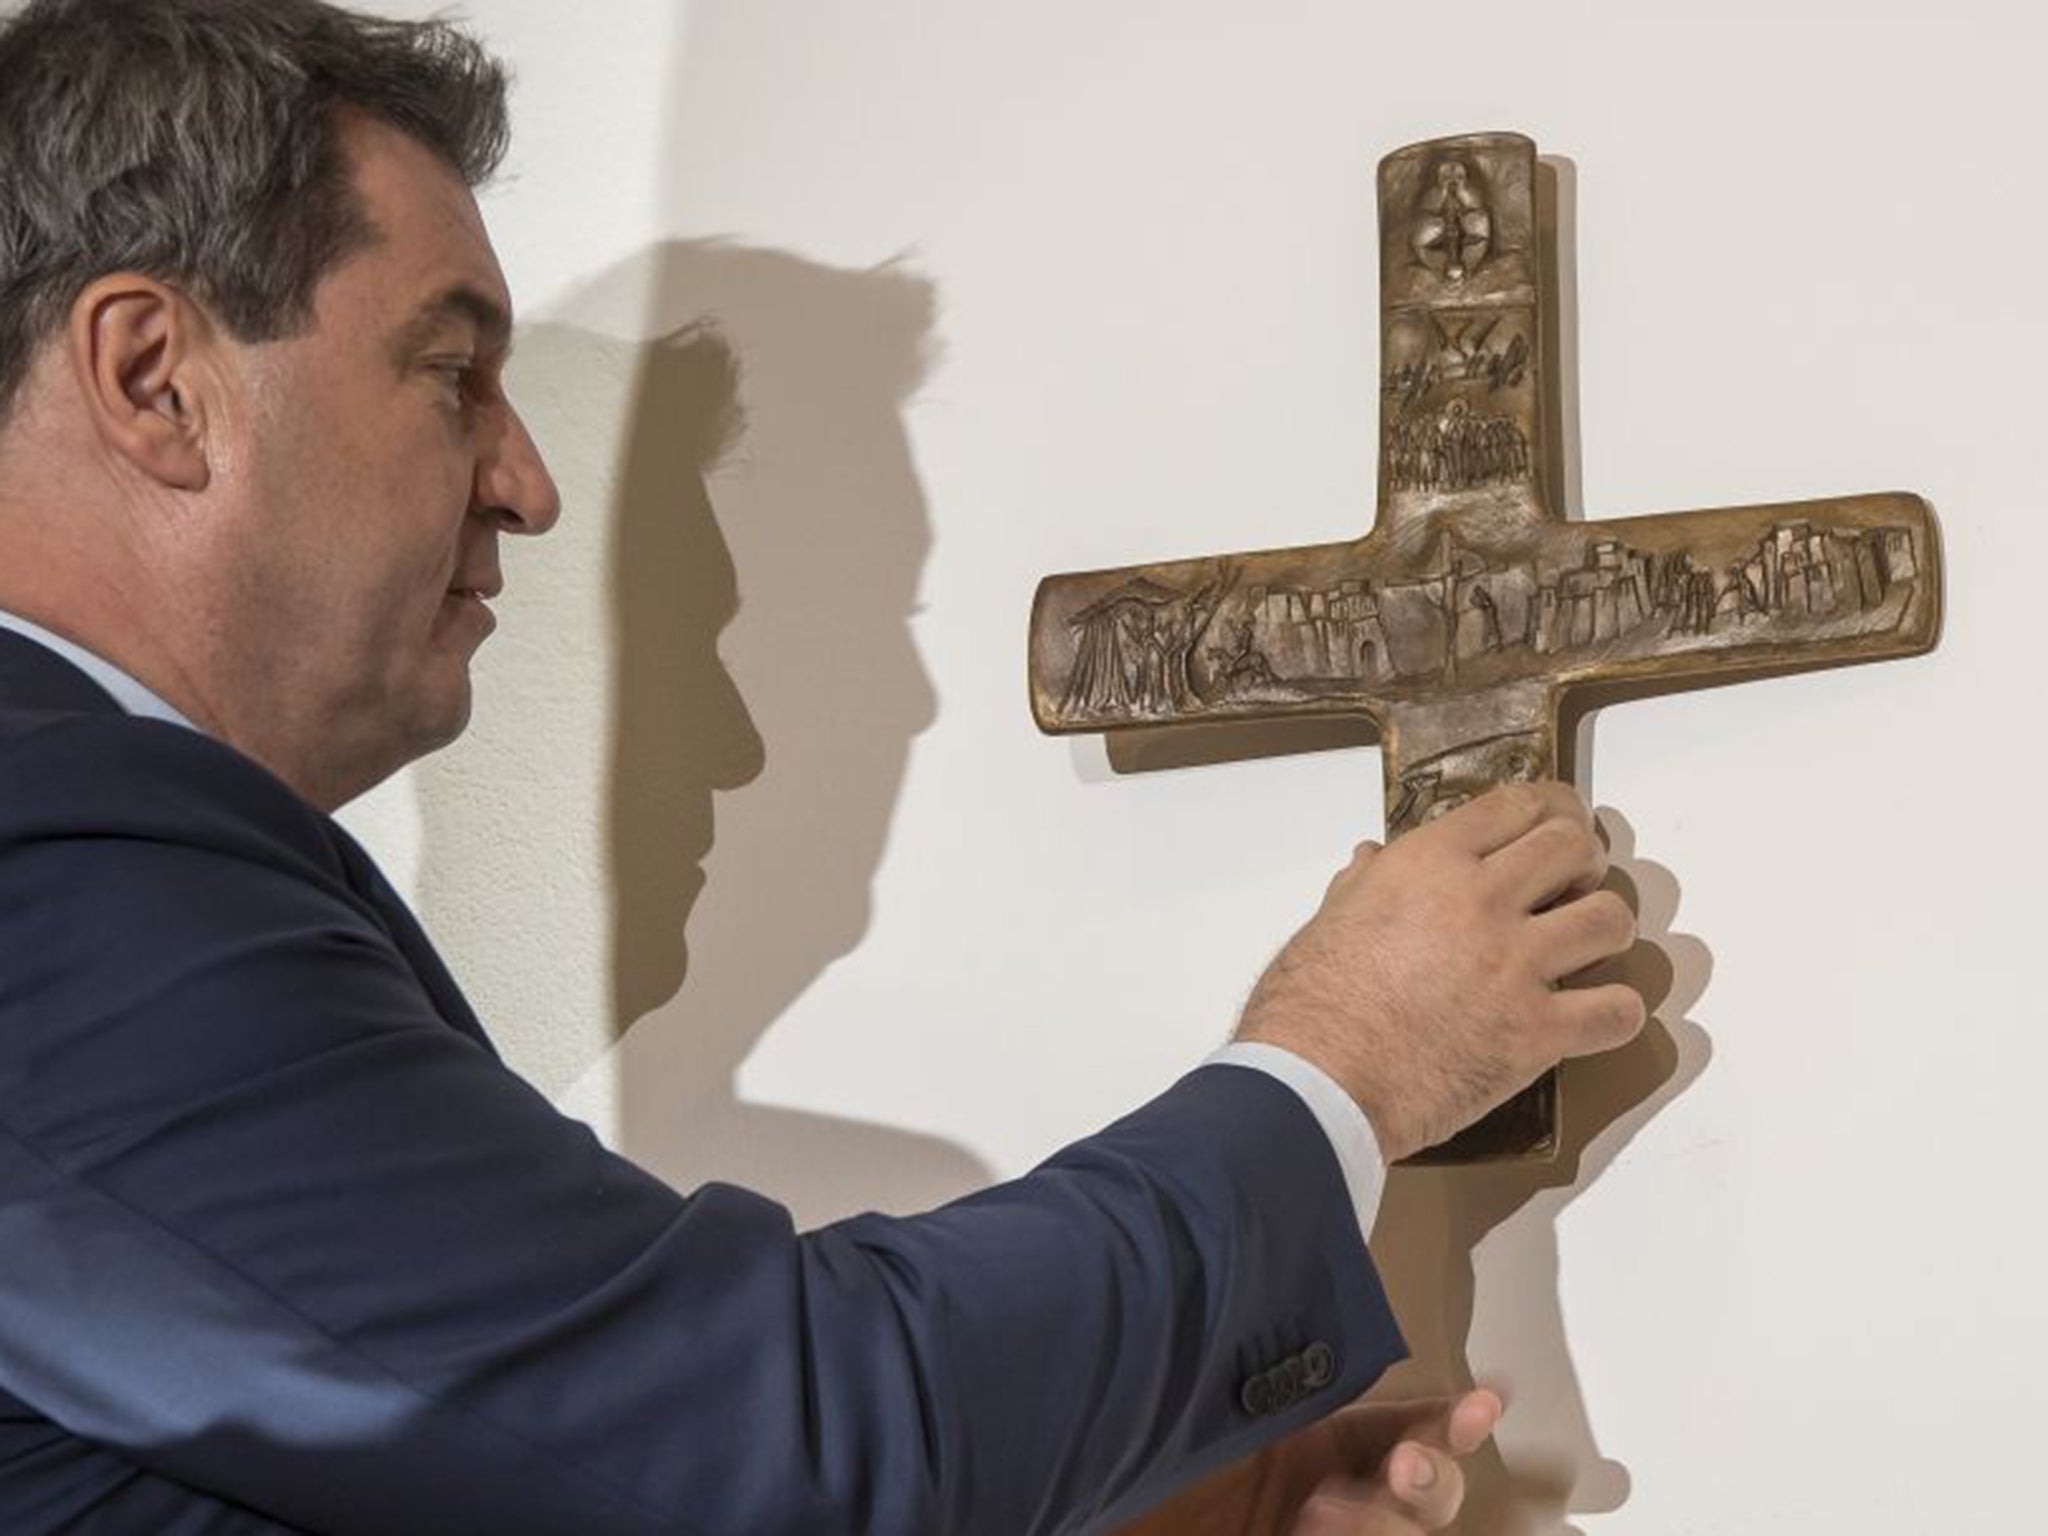 Markus Soeder, Governor of the German state of Bavaria, hangs up a cross at the entrance of the state chancellery in Munich, Germany